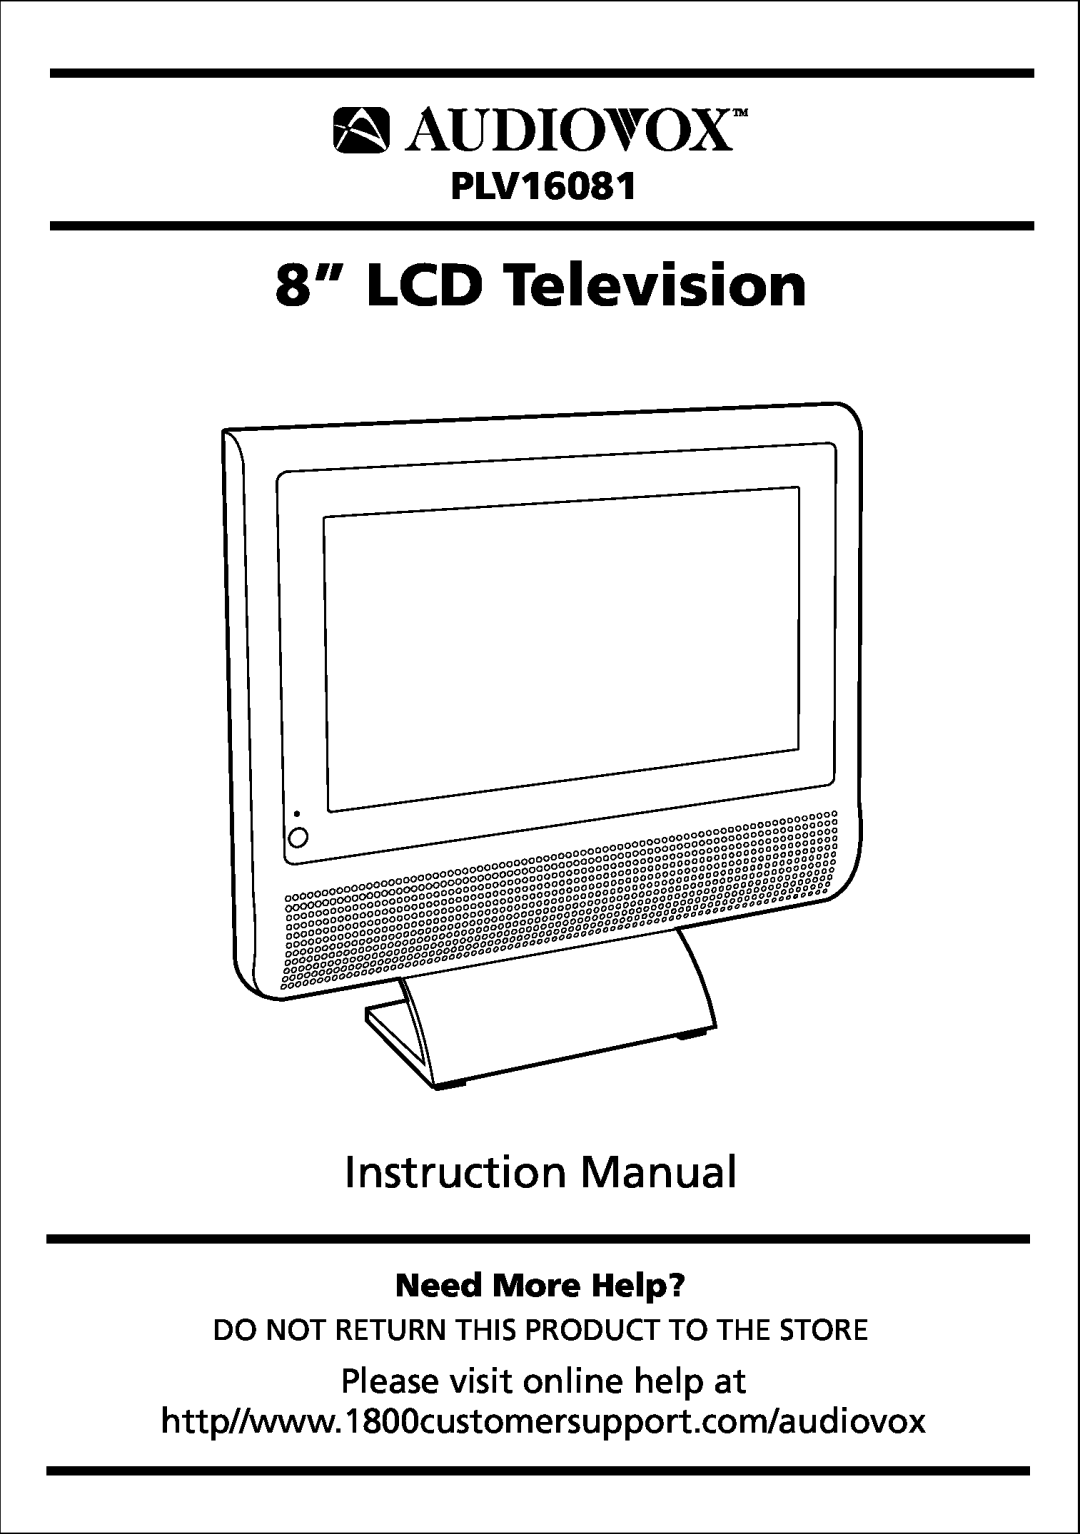 Audiovox PLV16081 instruction manual 8” LCD Television, Instruction Manual, Need More Help?, Please visit online help at 